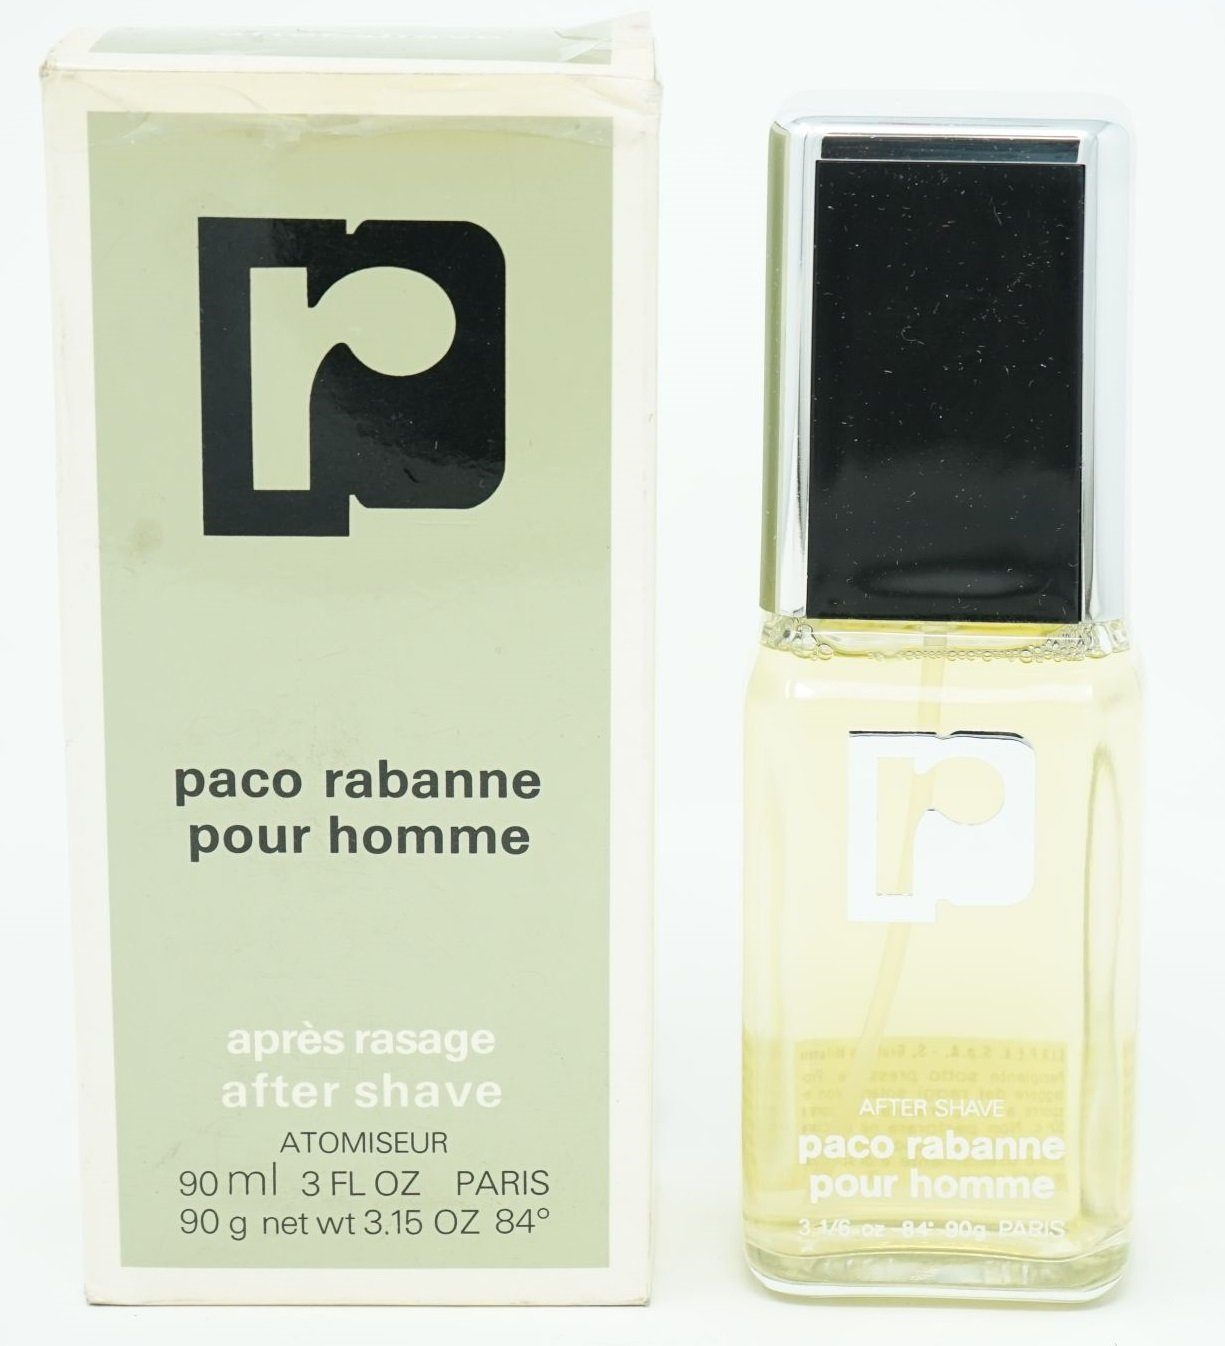 Homme After-Shave Paco Shave paco Atomiseur Pour After Rabanne 90 rabanne ml